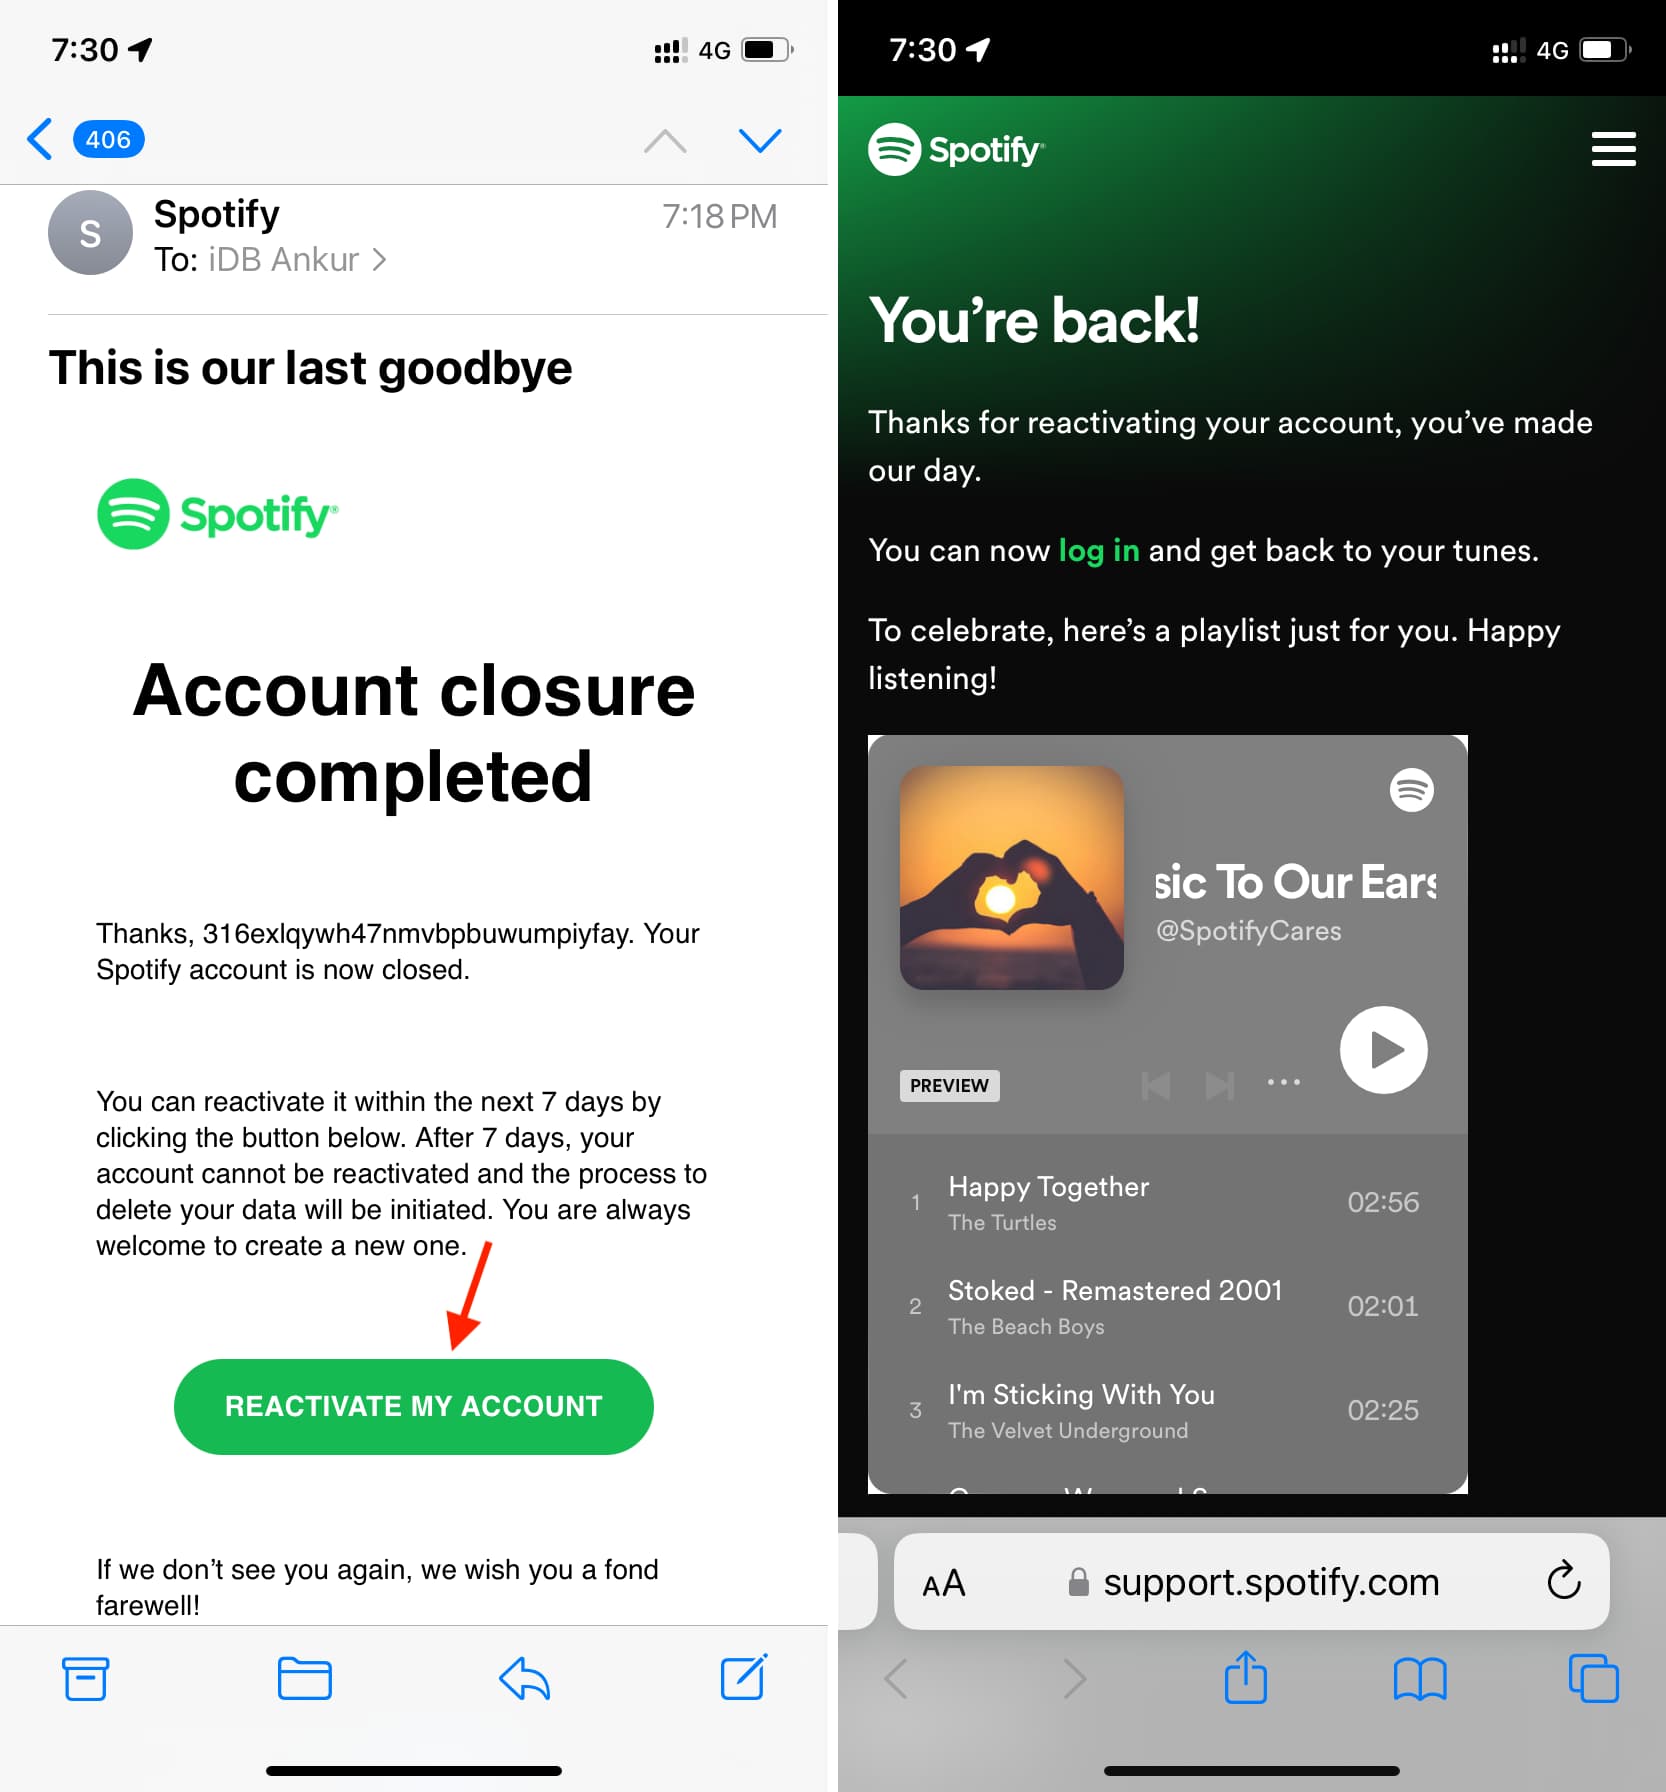 Reactivate your deleted Spotify account